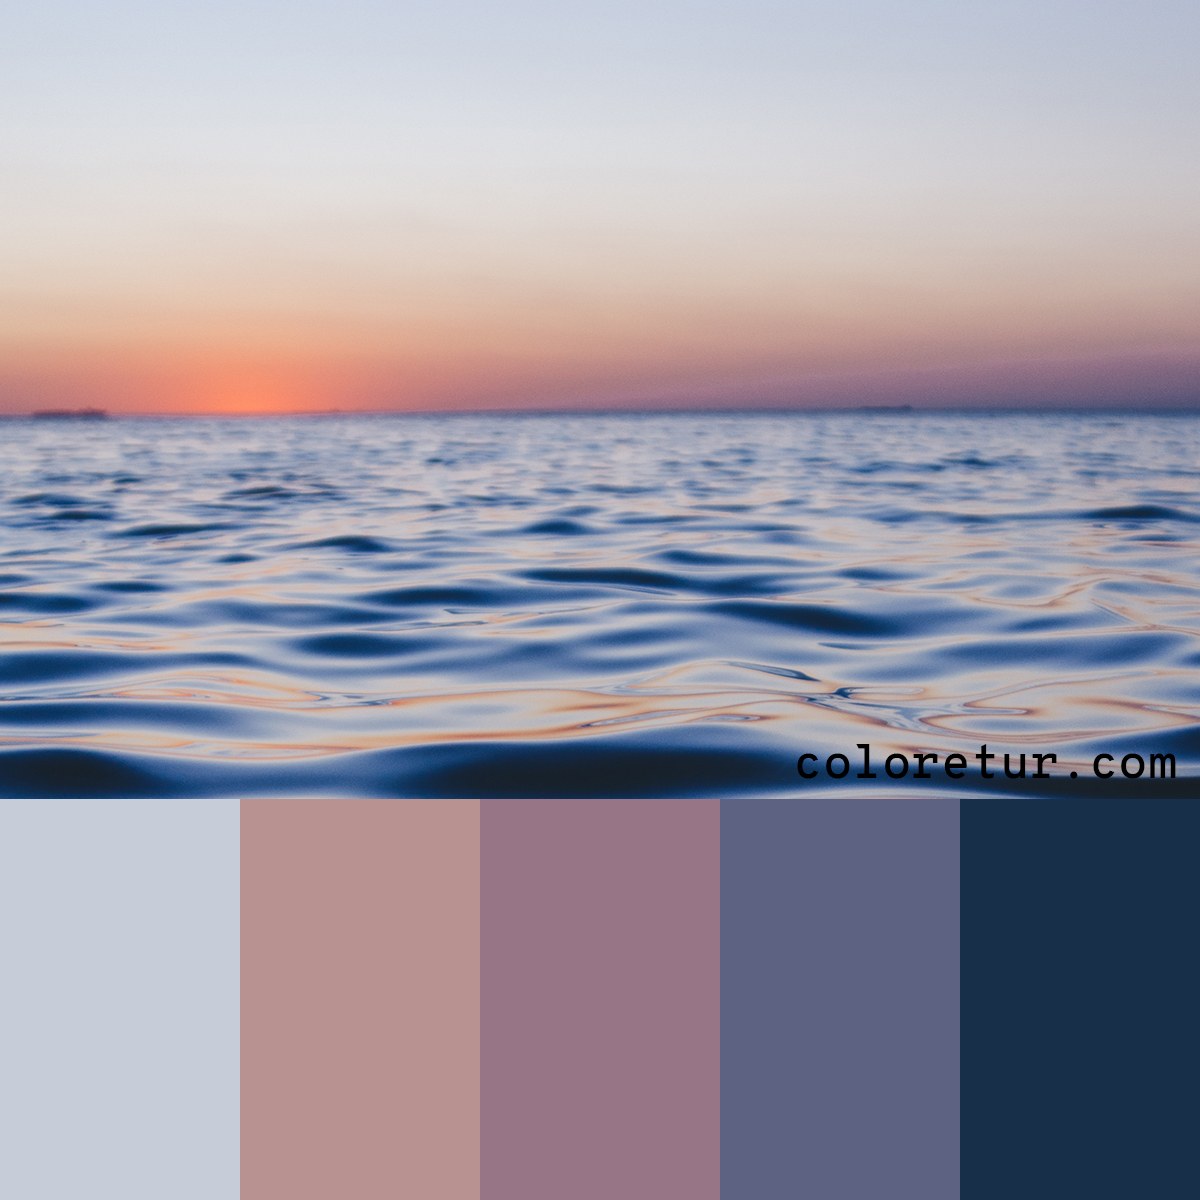 The beautiful ocean sunset as a color palette